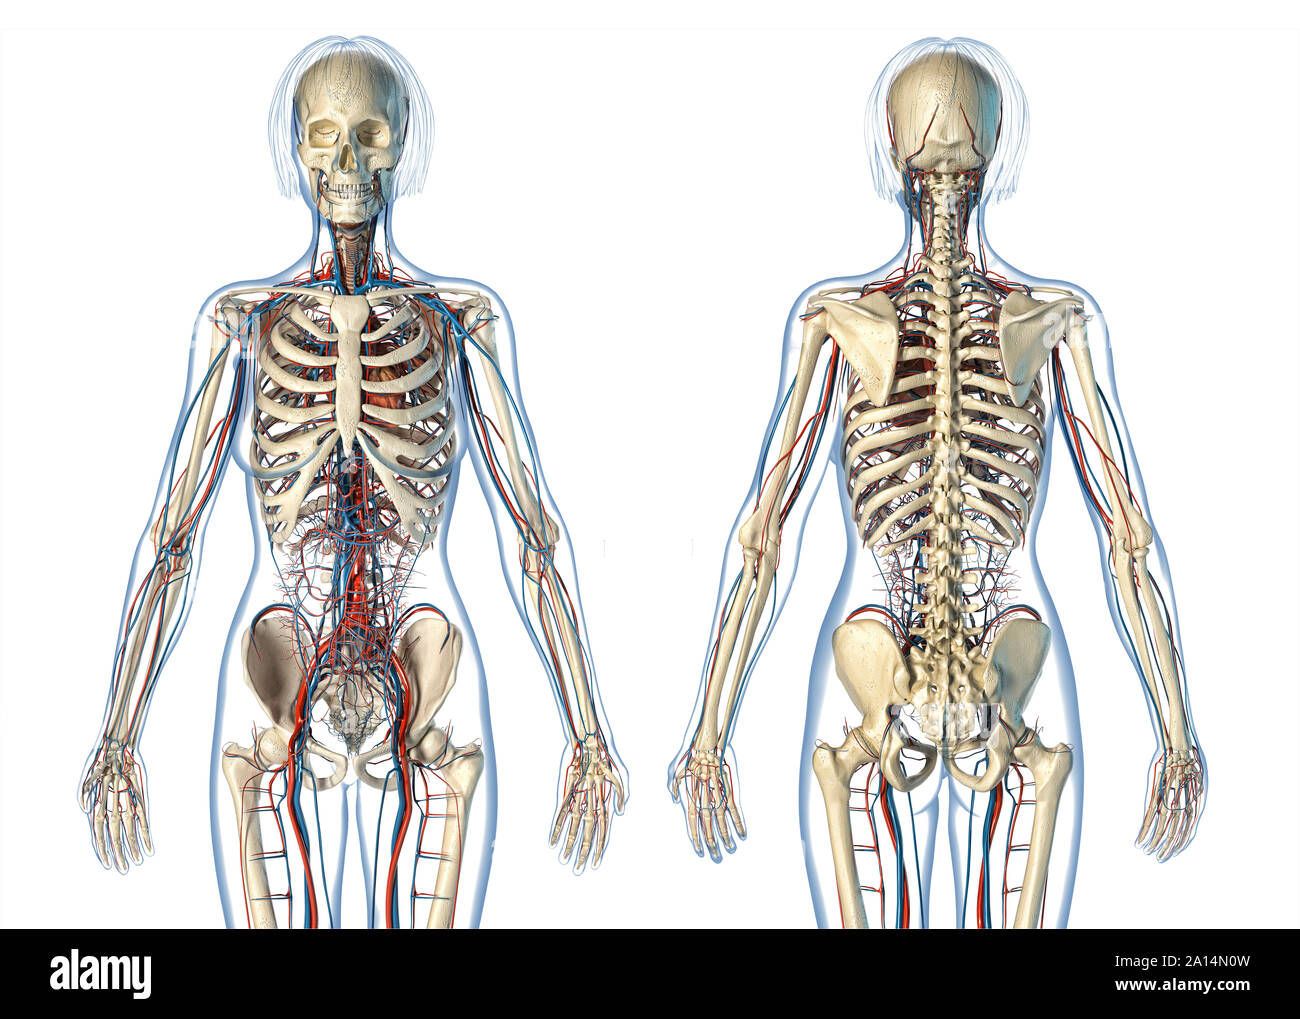 Female anatomy of cardiovascular system with skeleton, rear and front views. Stock Photo